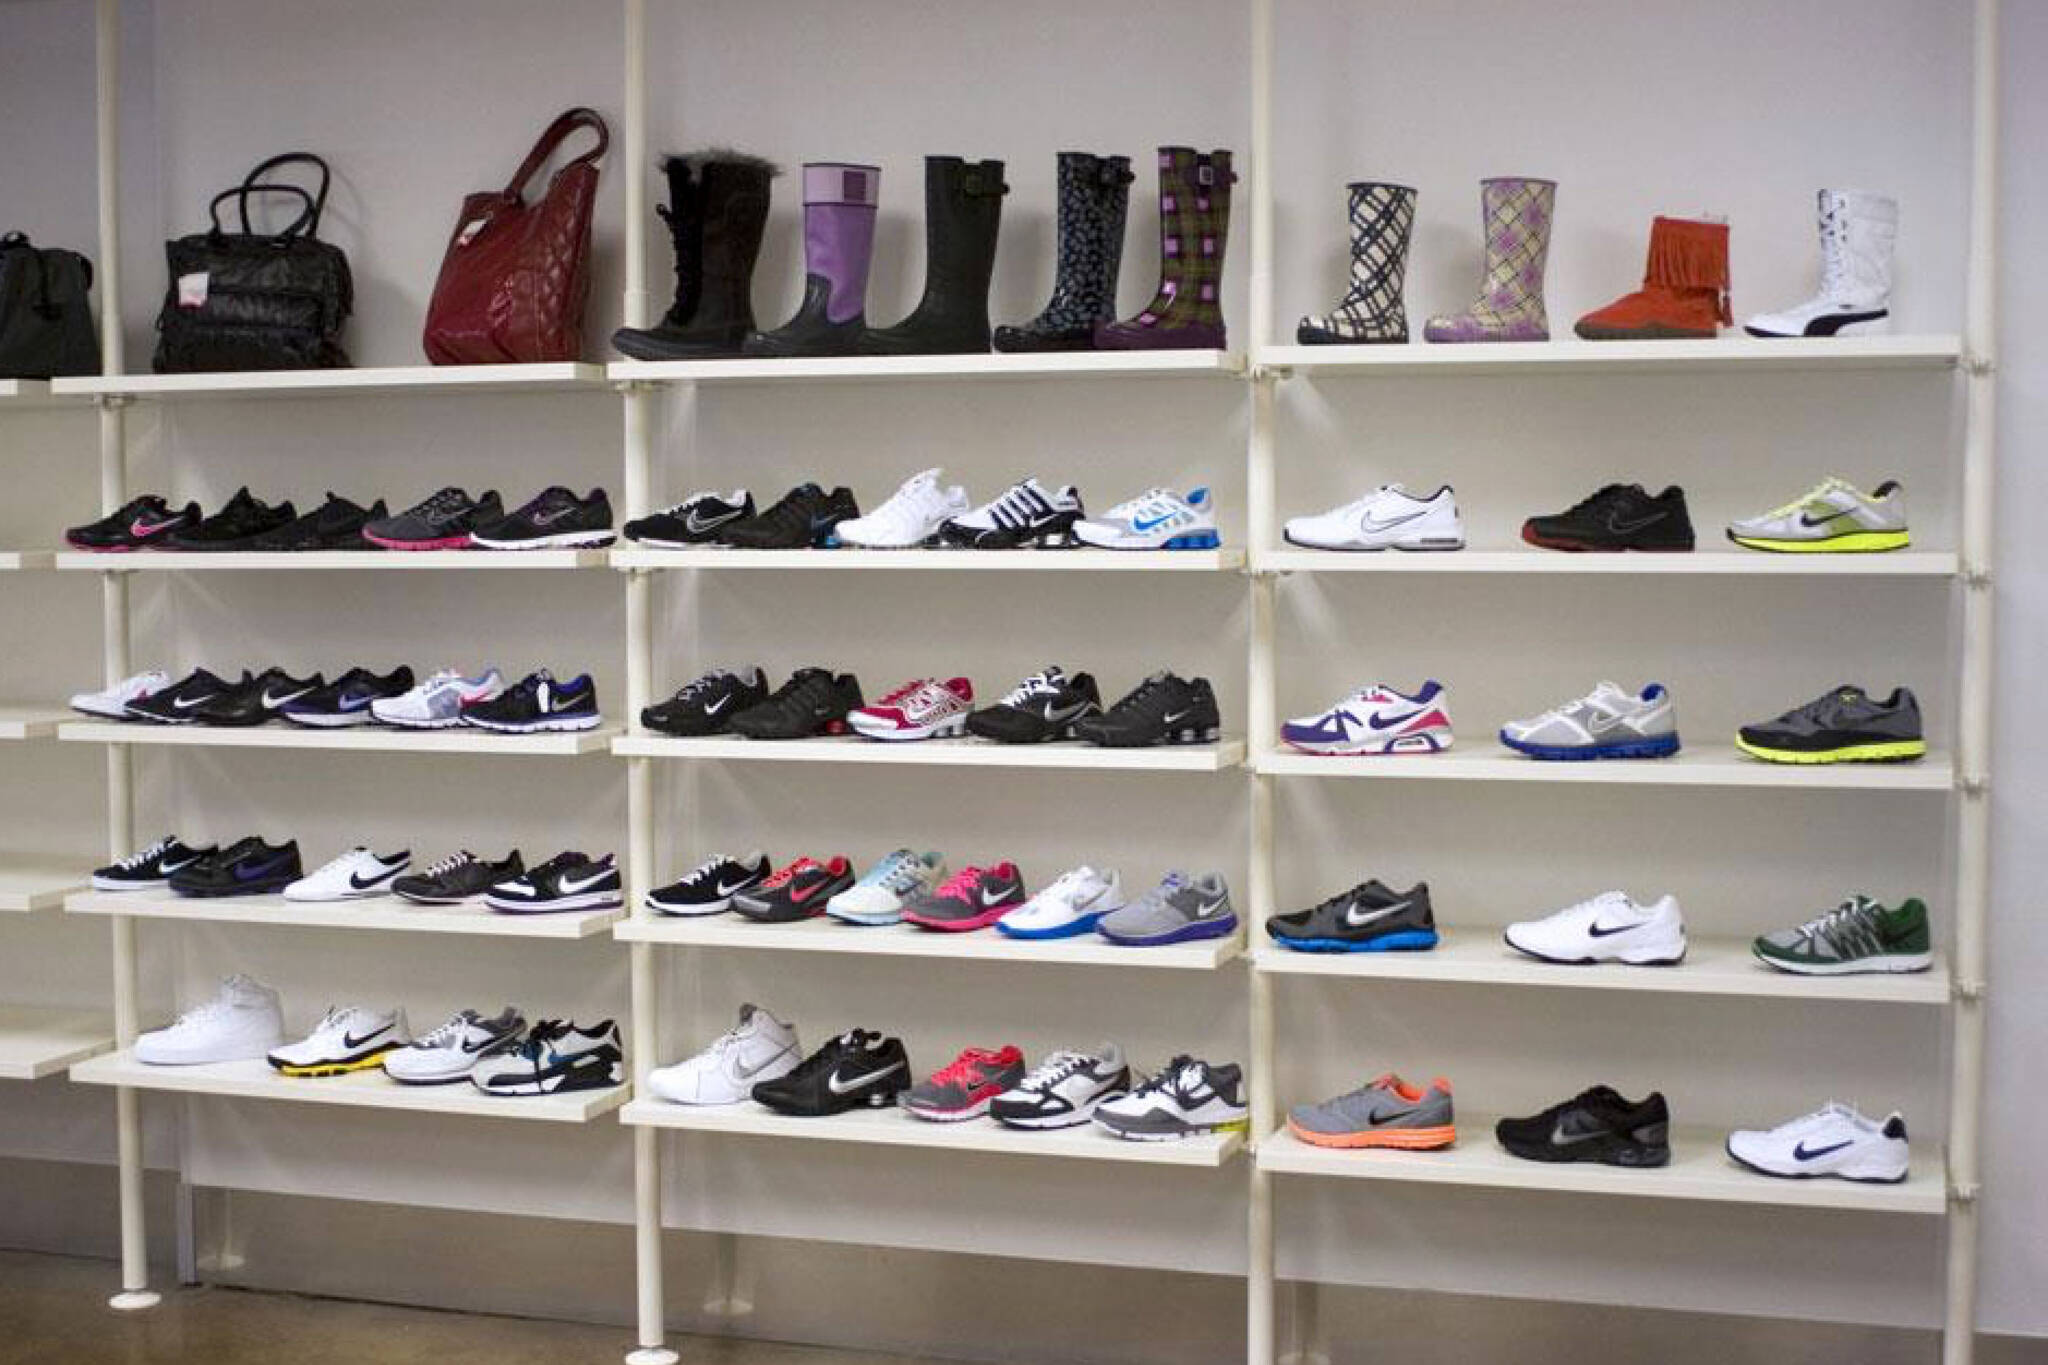 Store known for its affordable sneakers permanently shuts down